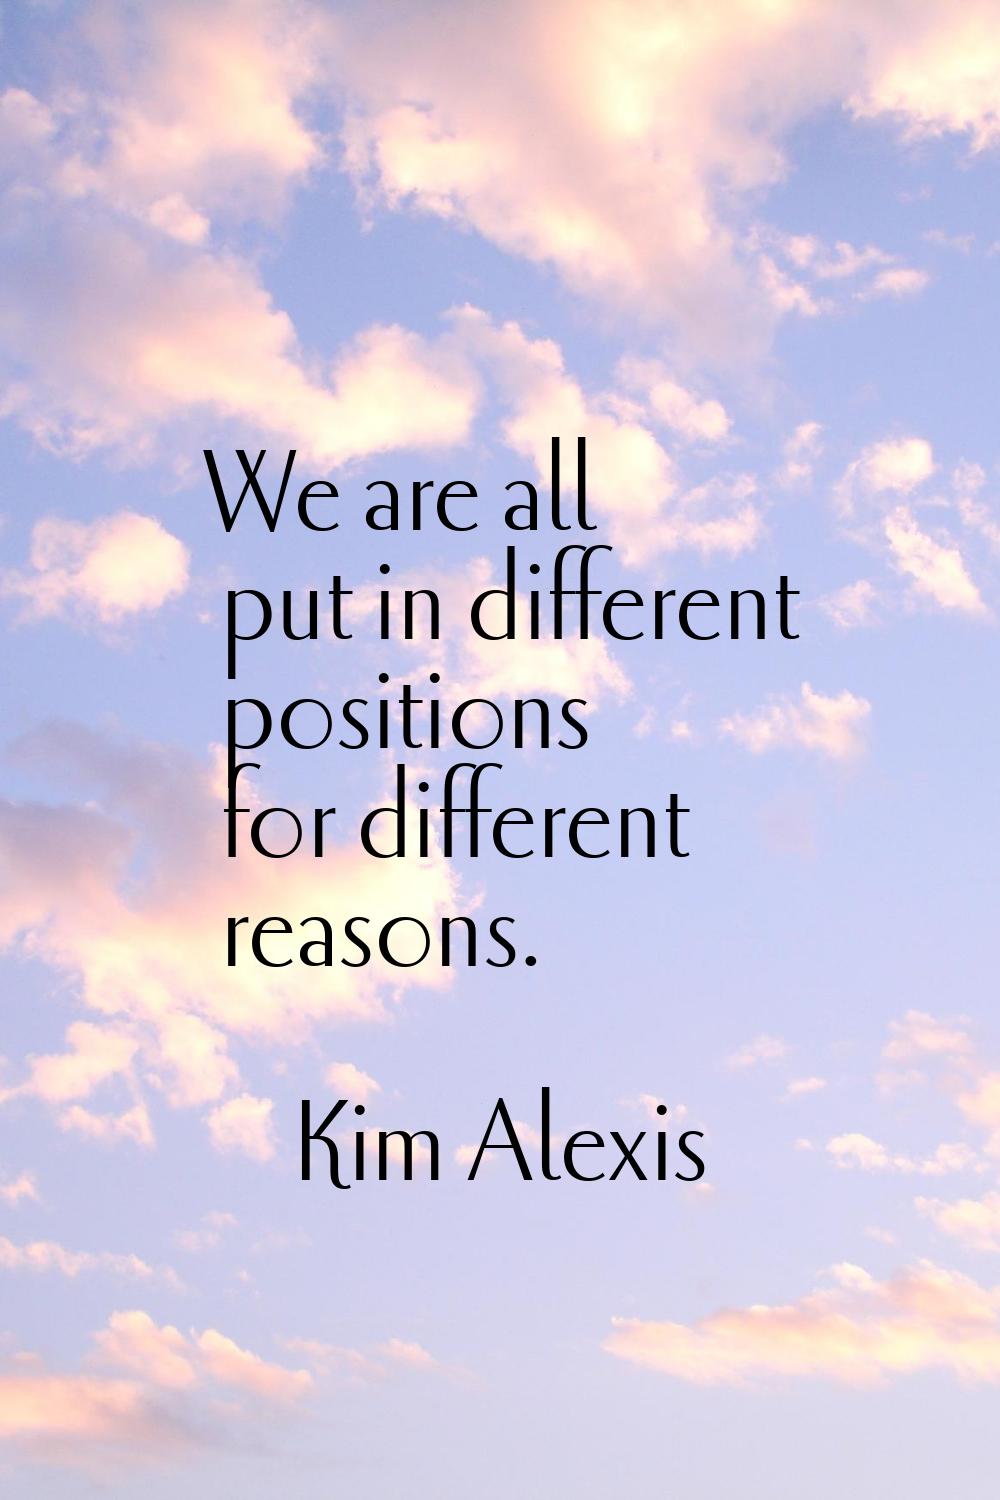 We are all put in different positions for different reasons.